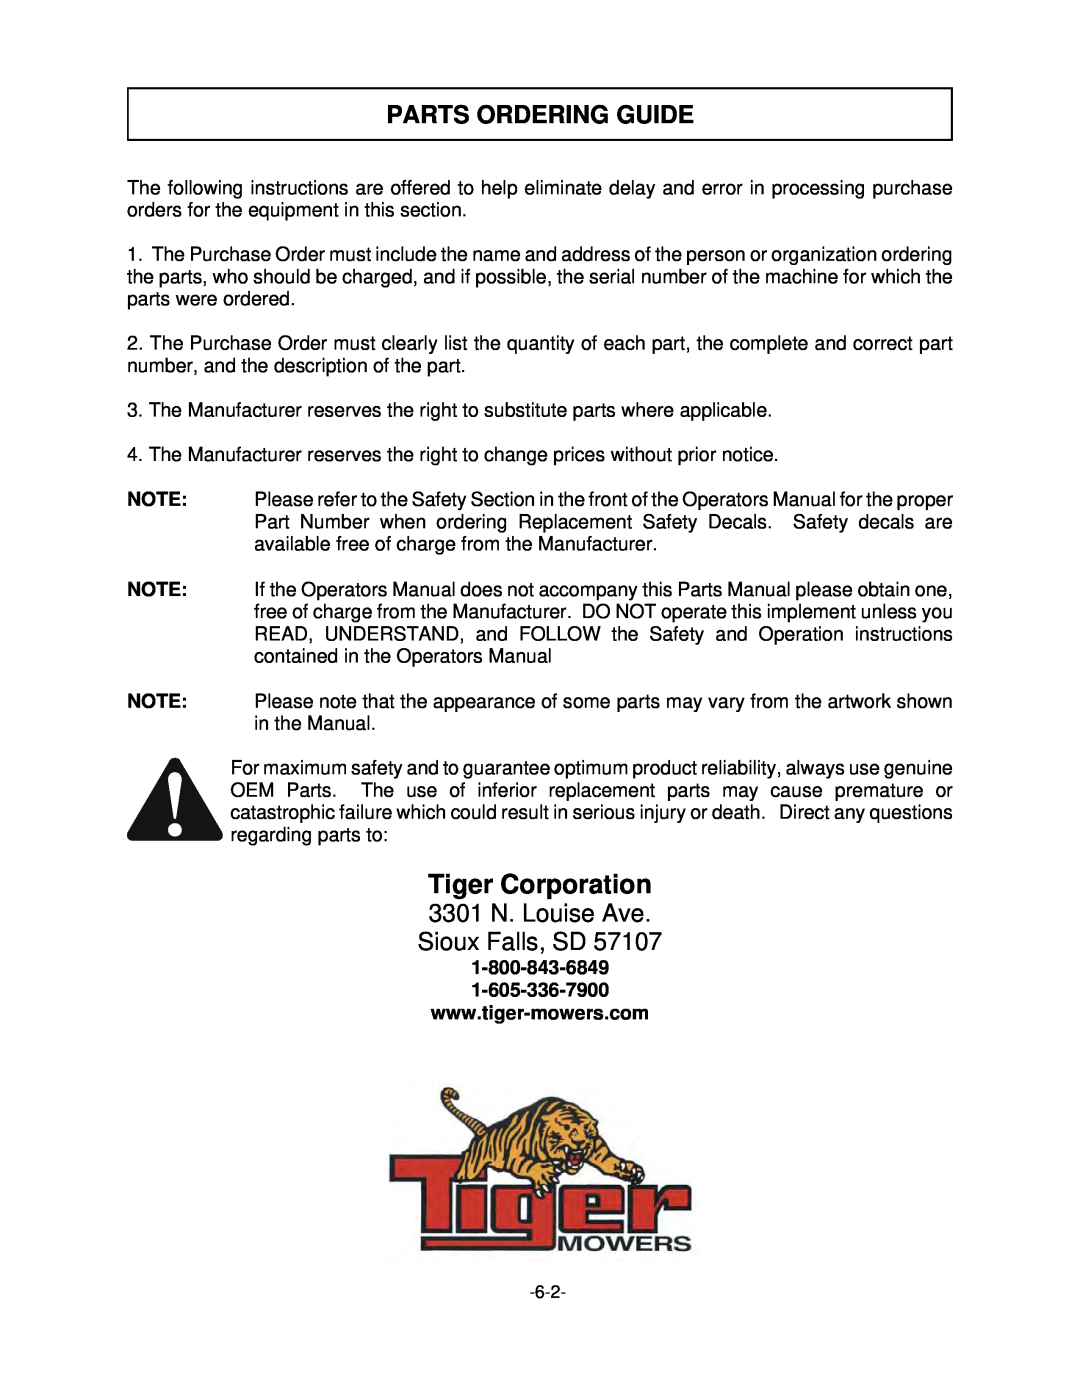 Tiger Mowers FLX10, FLX15 manual Parts Ordering Guide, Tiger Corporation, 3301 N. Louise Ave Sioux Falls, SD 